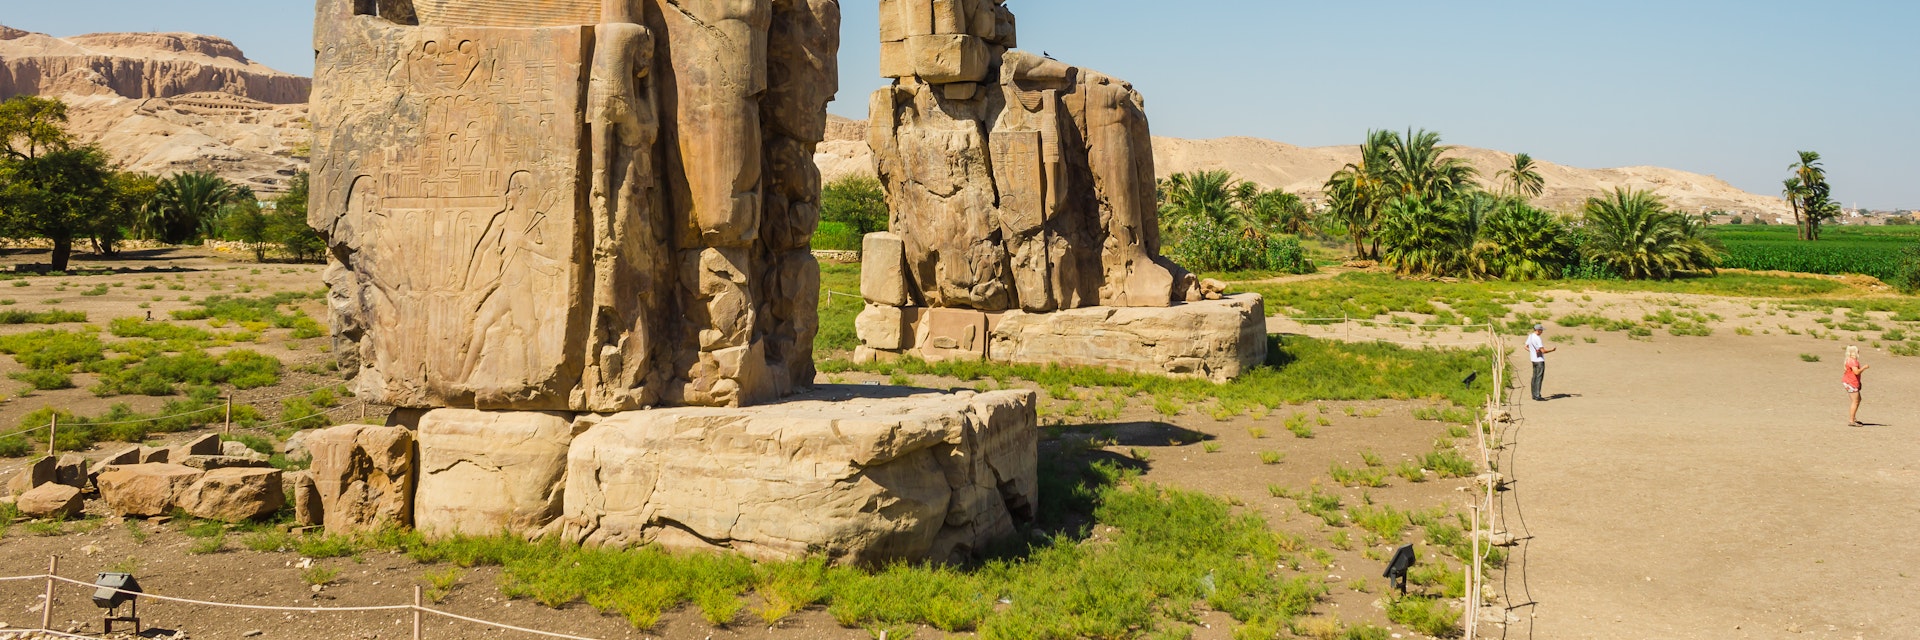 Colossi of Memnon, Valley of Kings, Luxor, Egypt.